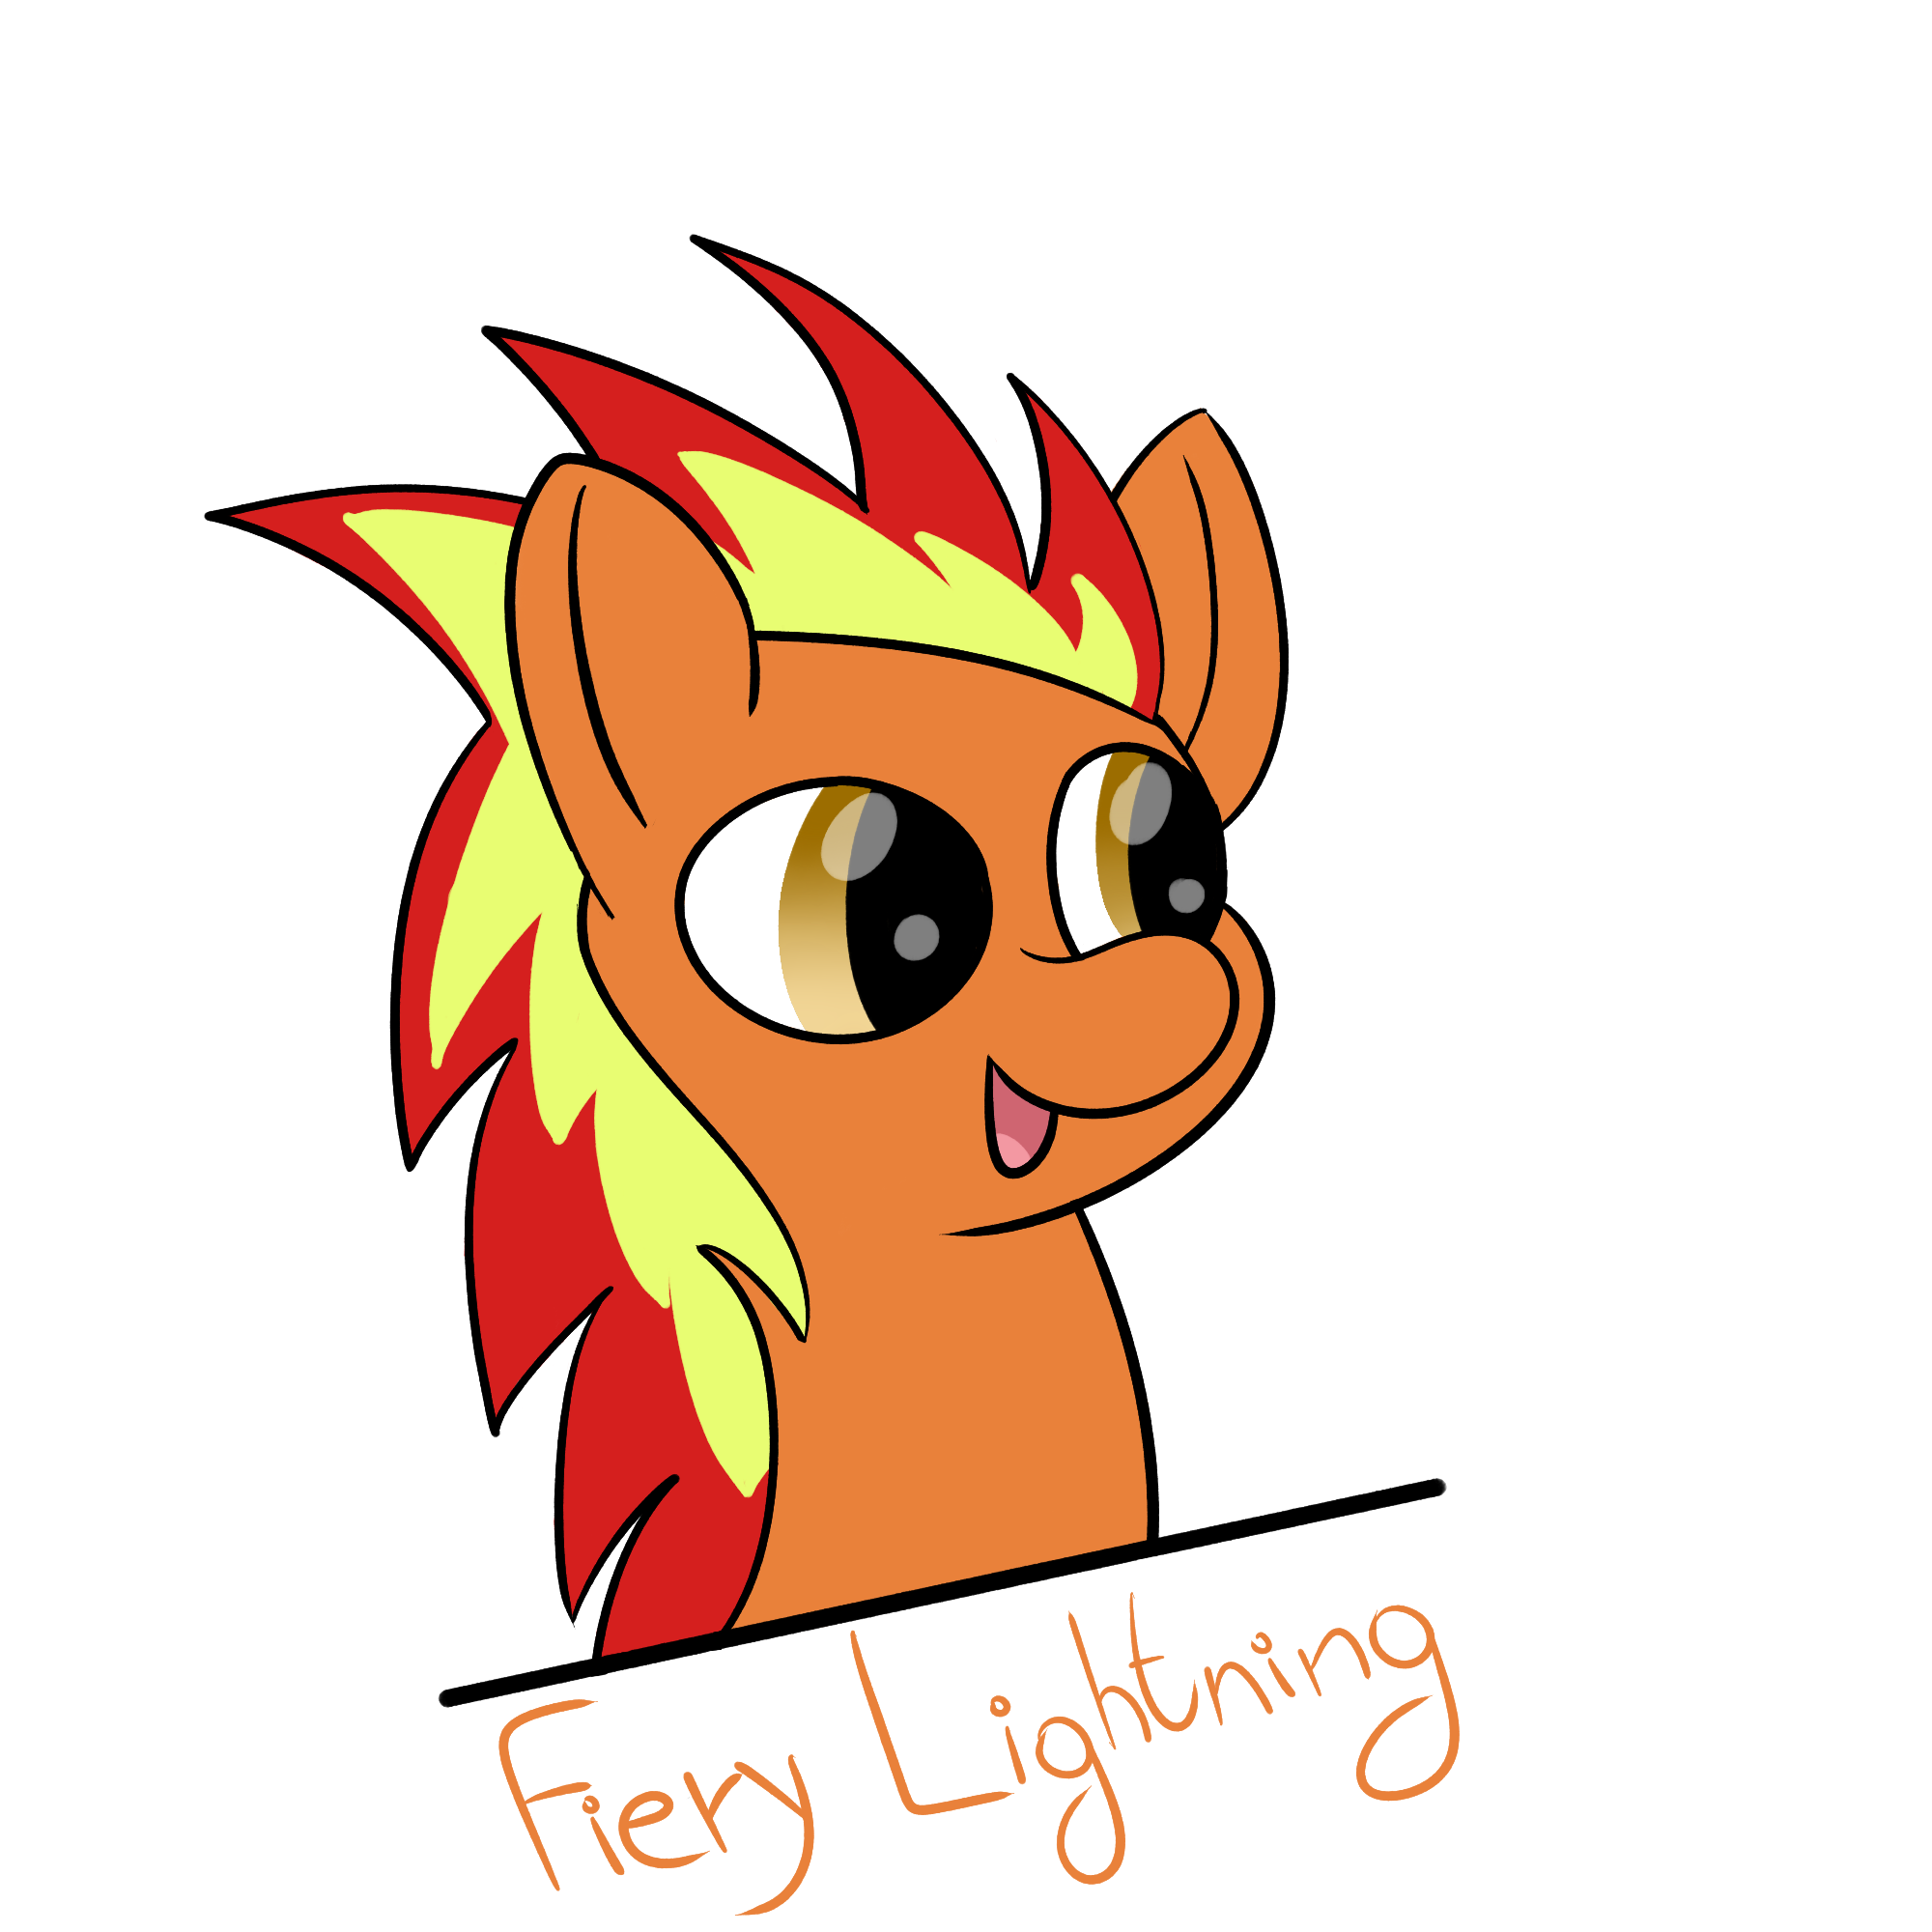 Fiery Lightning - Financial manager and secretary